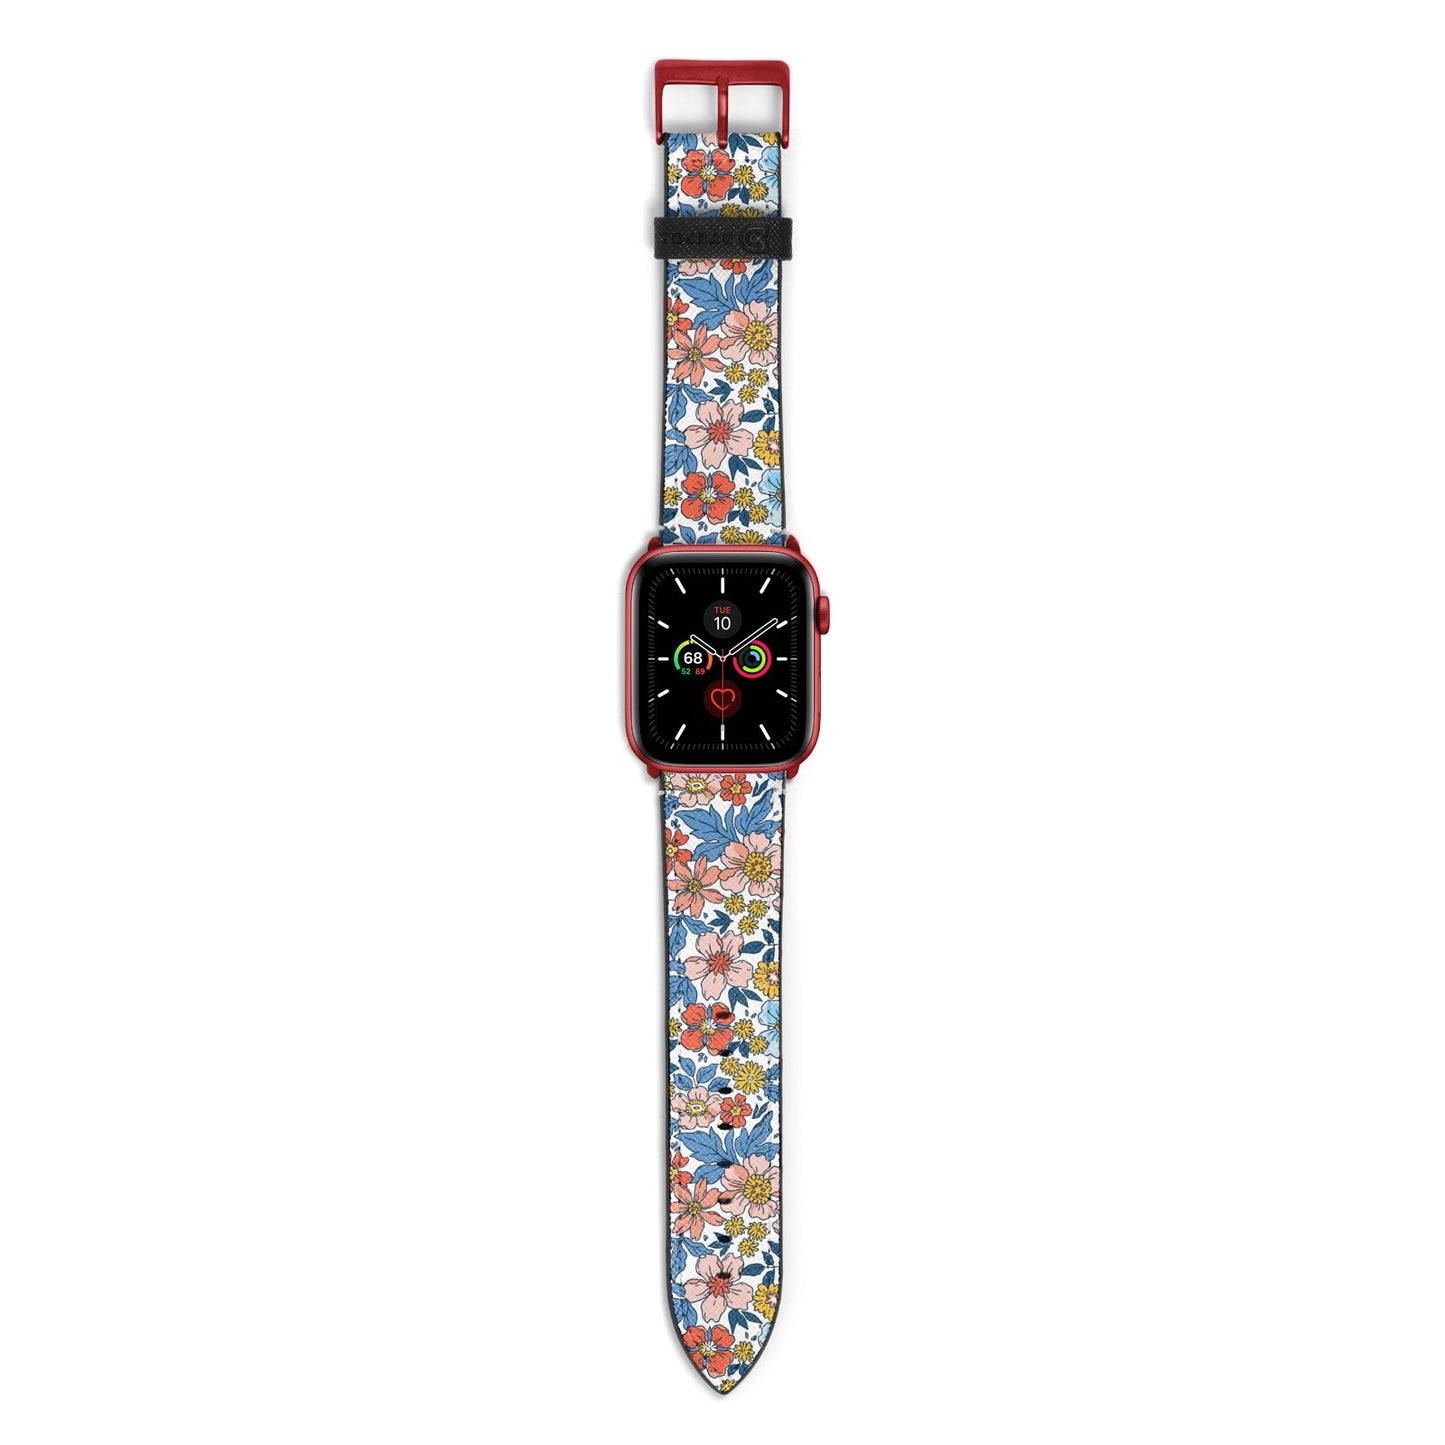 Vintage Flower Apple Watch Strap with Red Hardware